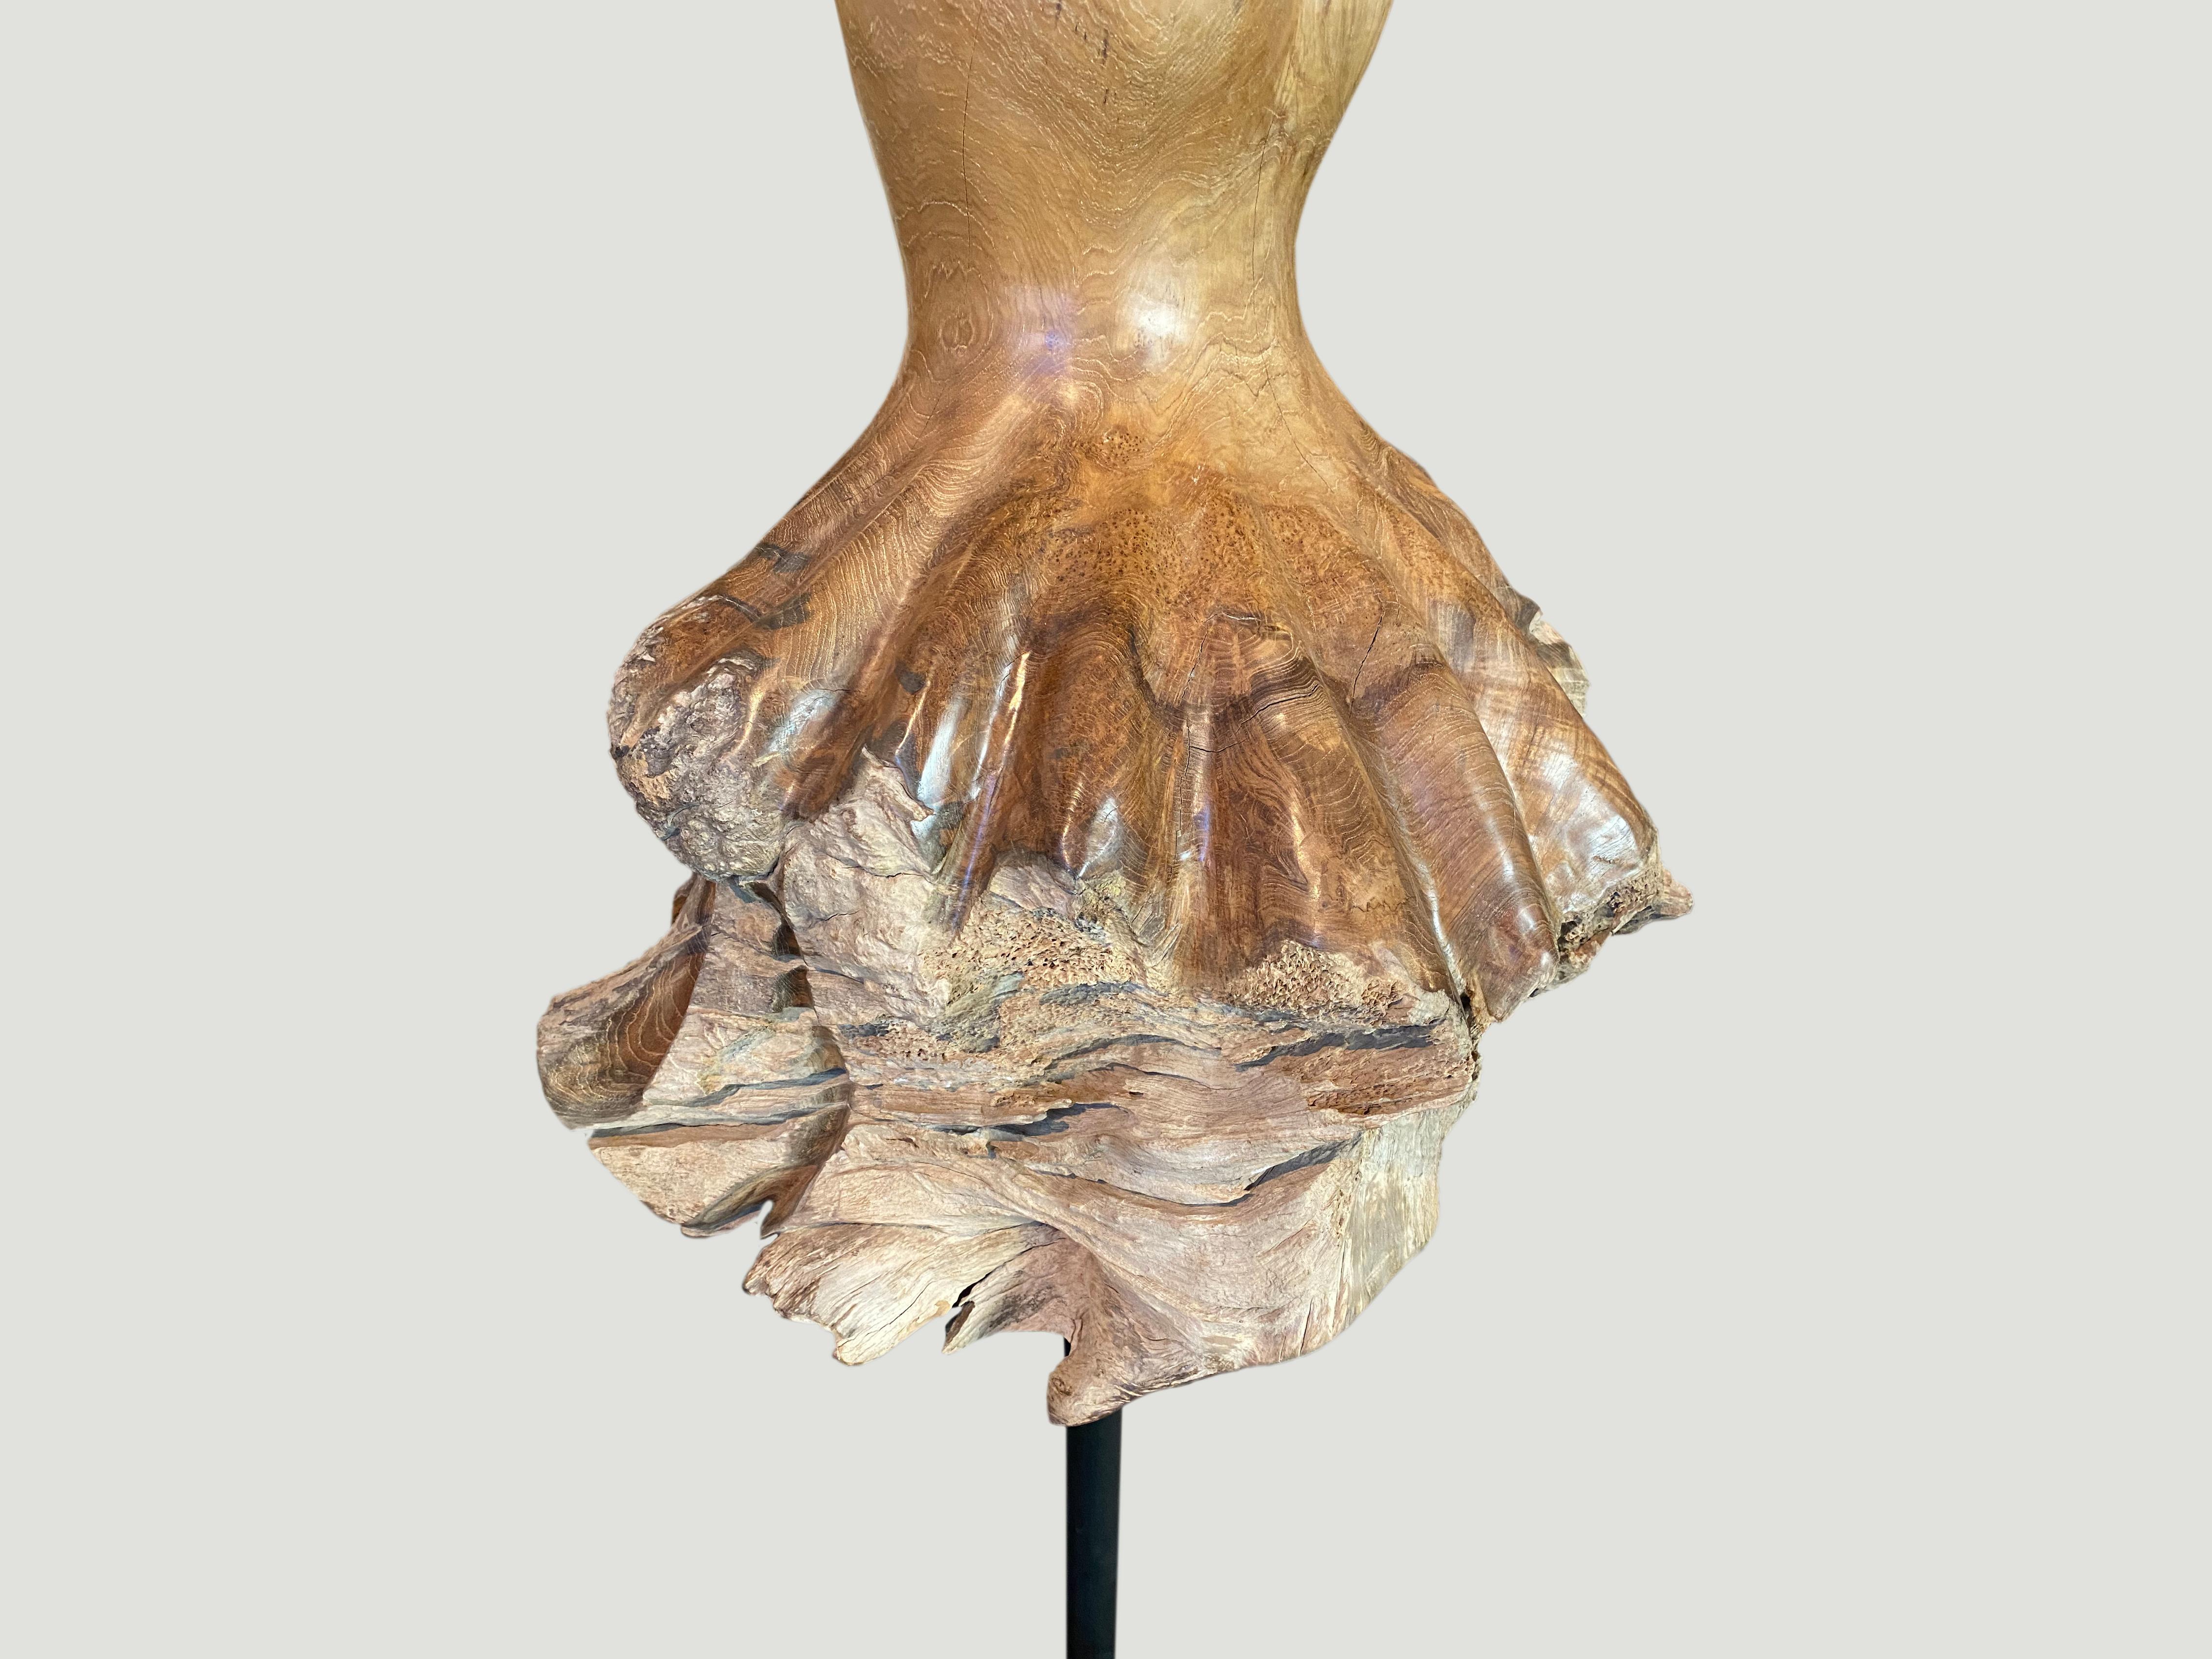 Andrianna Shamaris Teak Wood Ballerina Sculpture In Excellent Condition For Sale In New York, NY